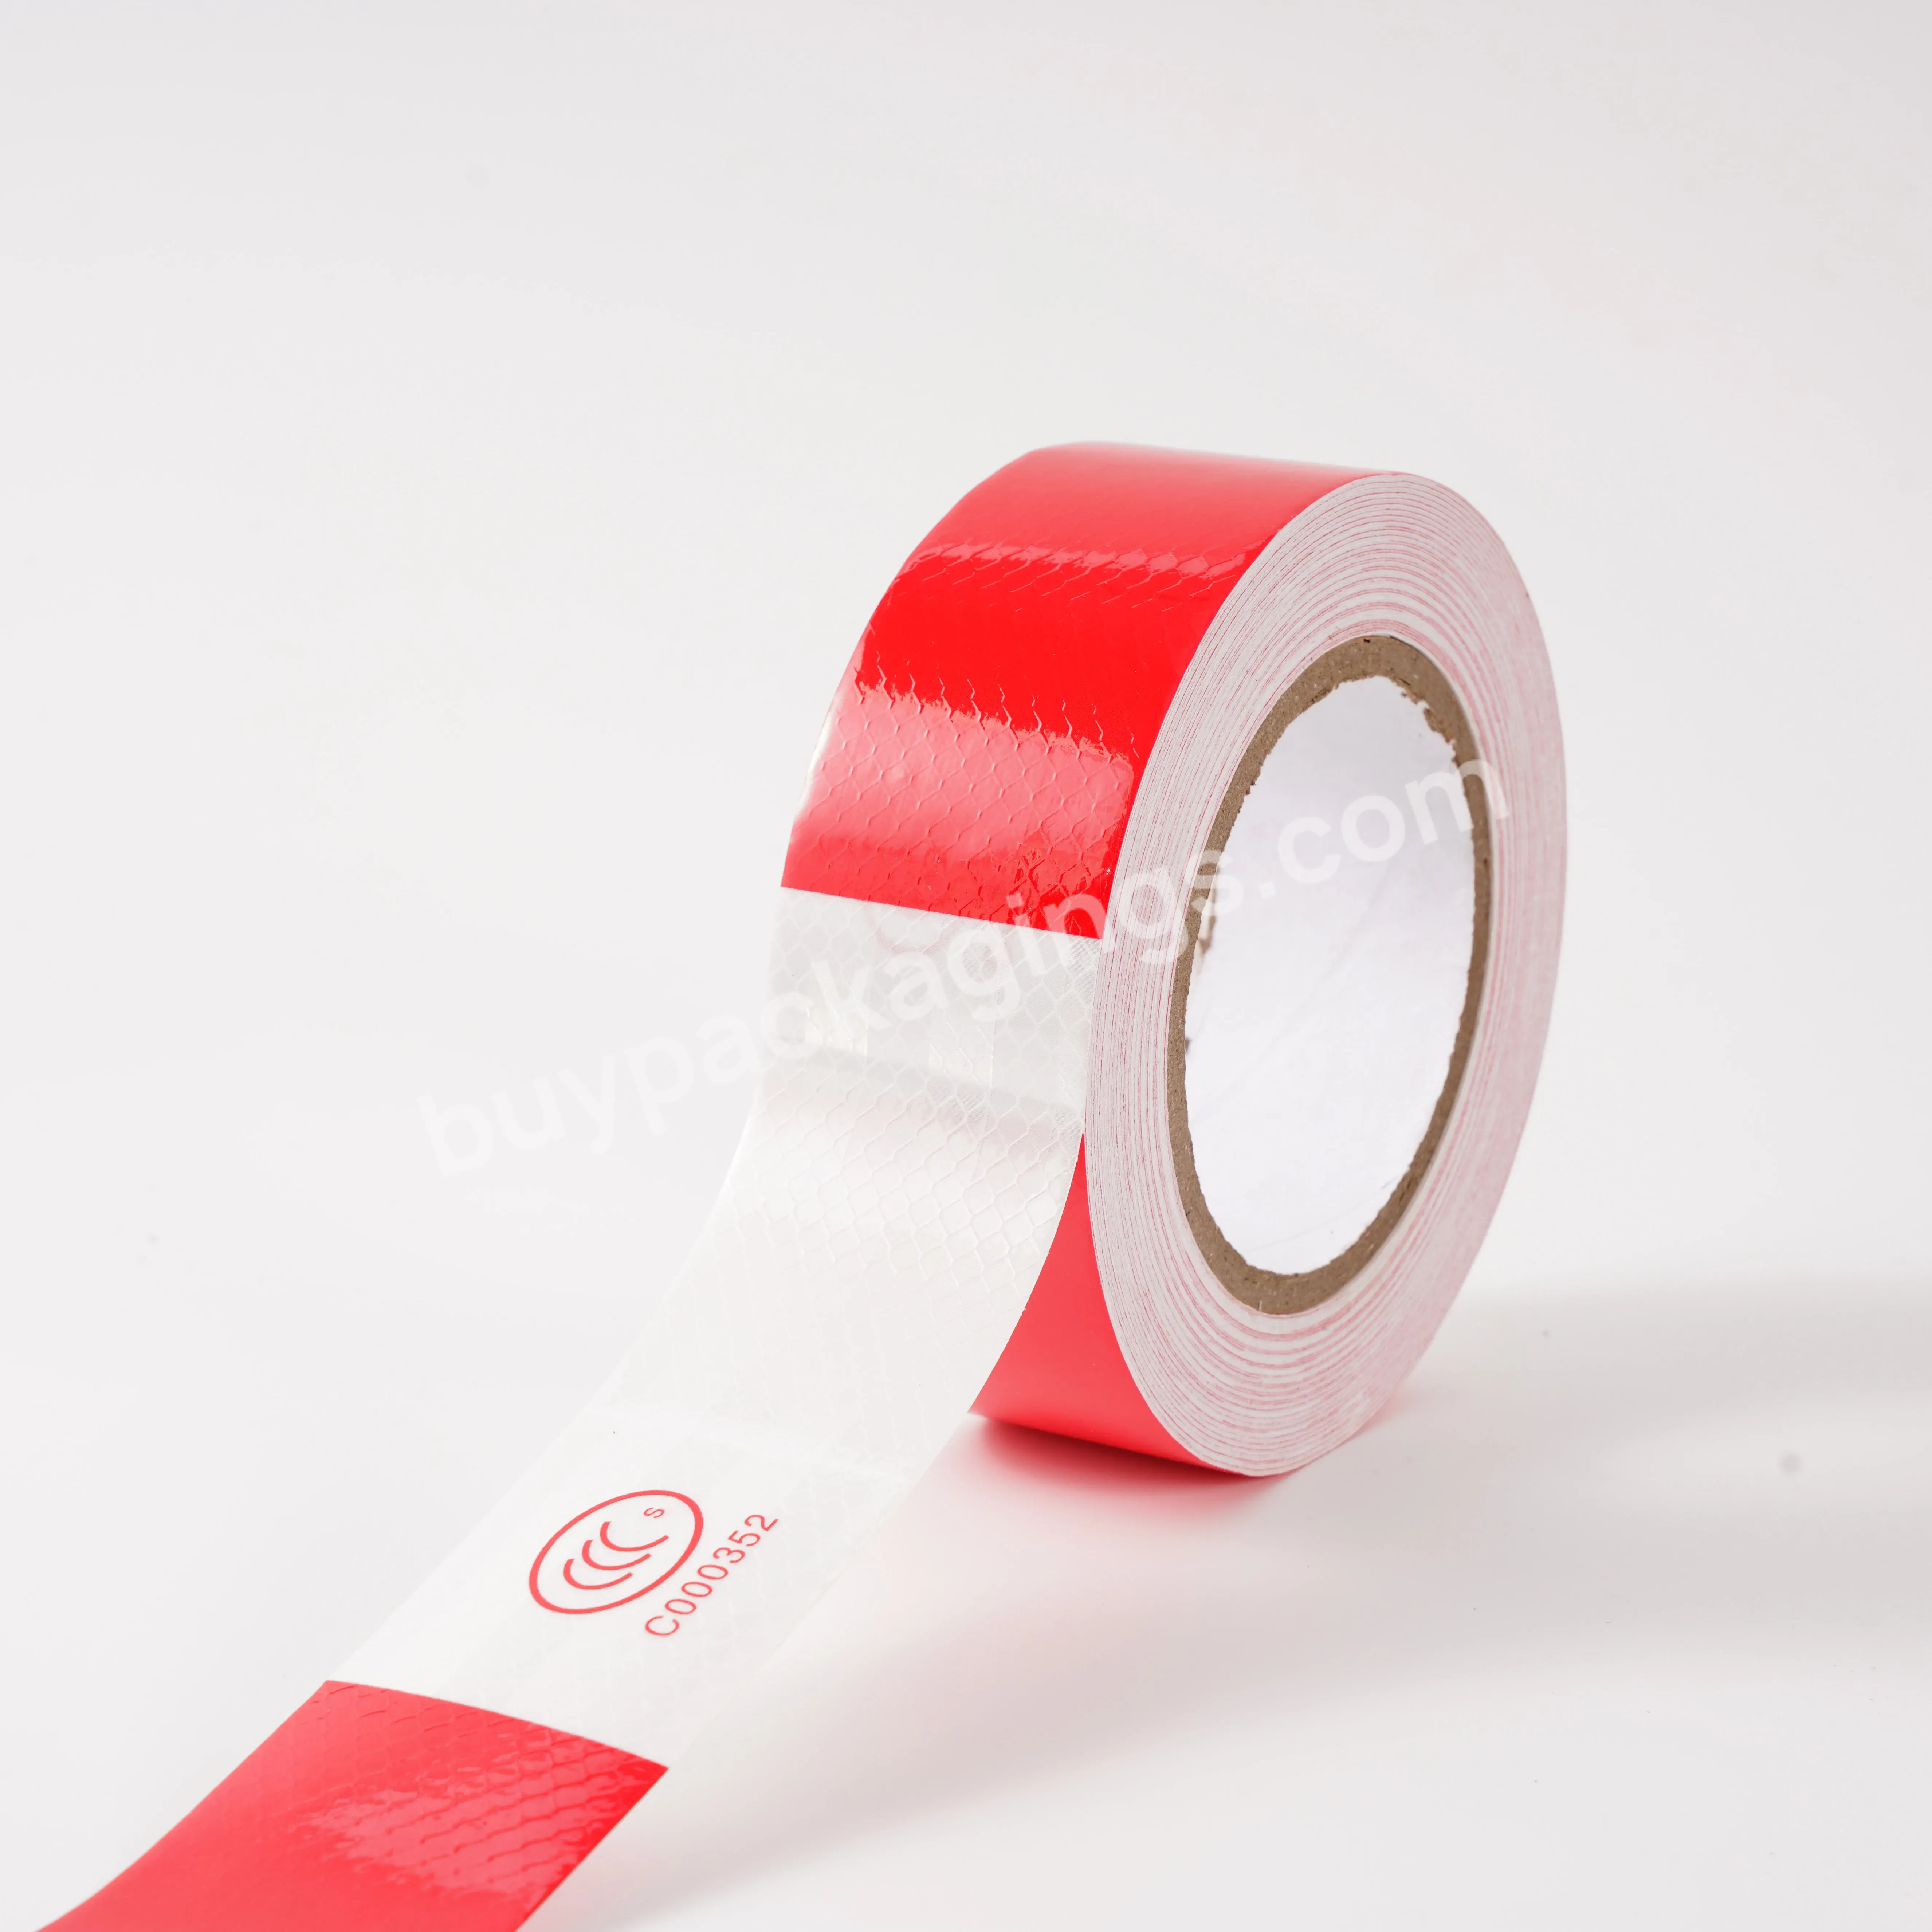 Red And White Reflective Warning Reflective Material Tape For Vehicle Driving - Buy Conspicuous Vehicle Reflective Tape Product,Reflective Tape For Car,Adhesive Reflective Tape.